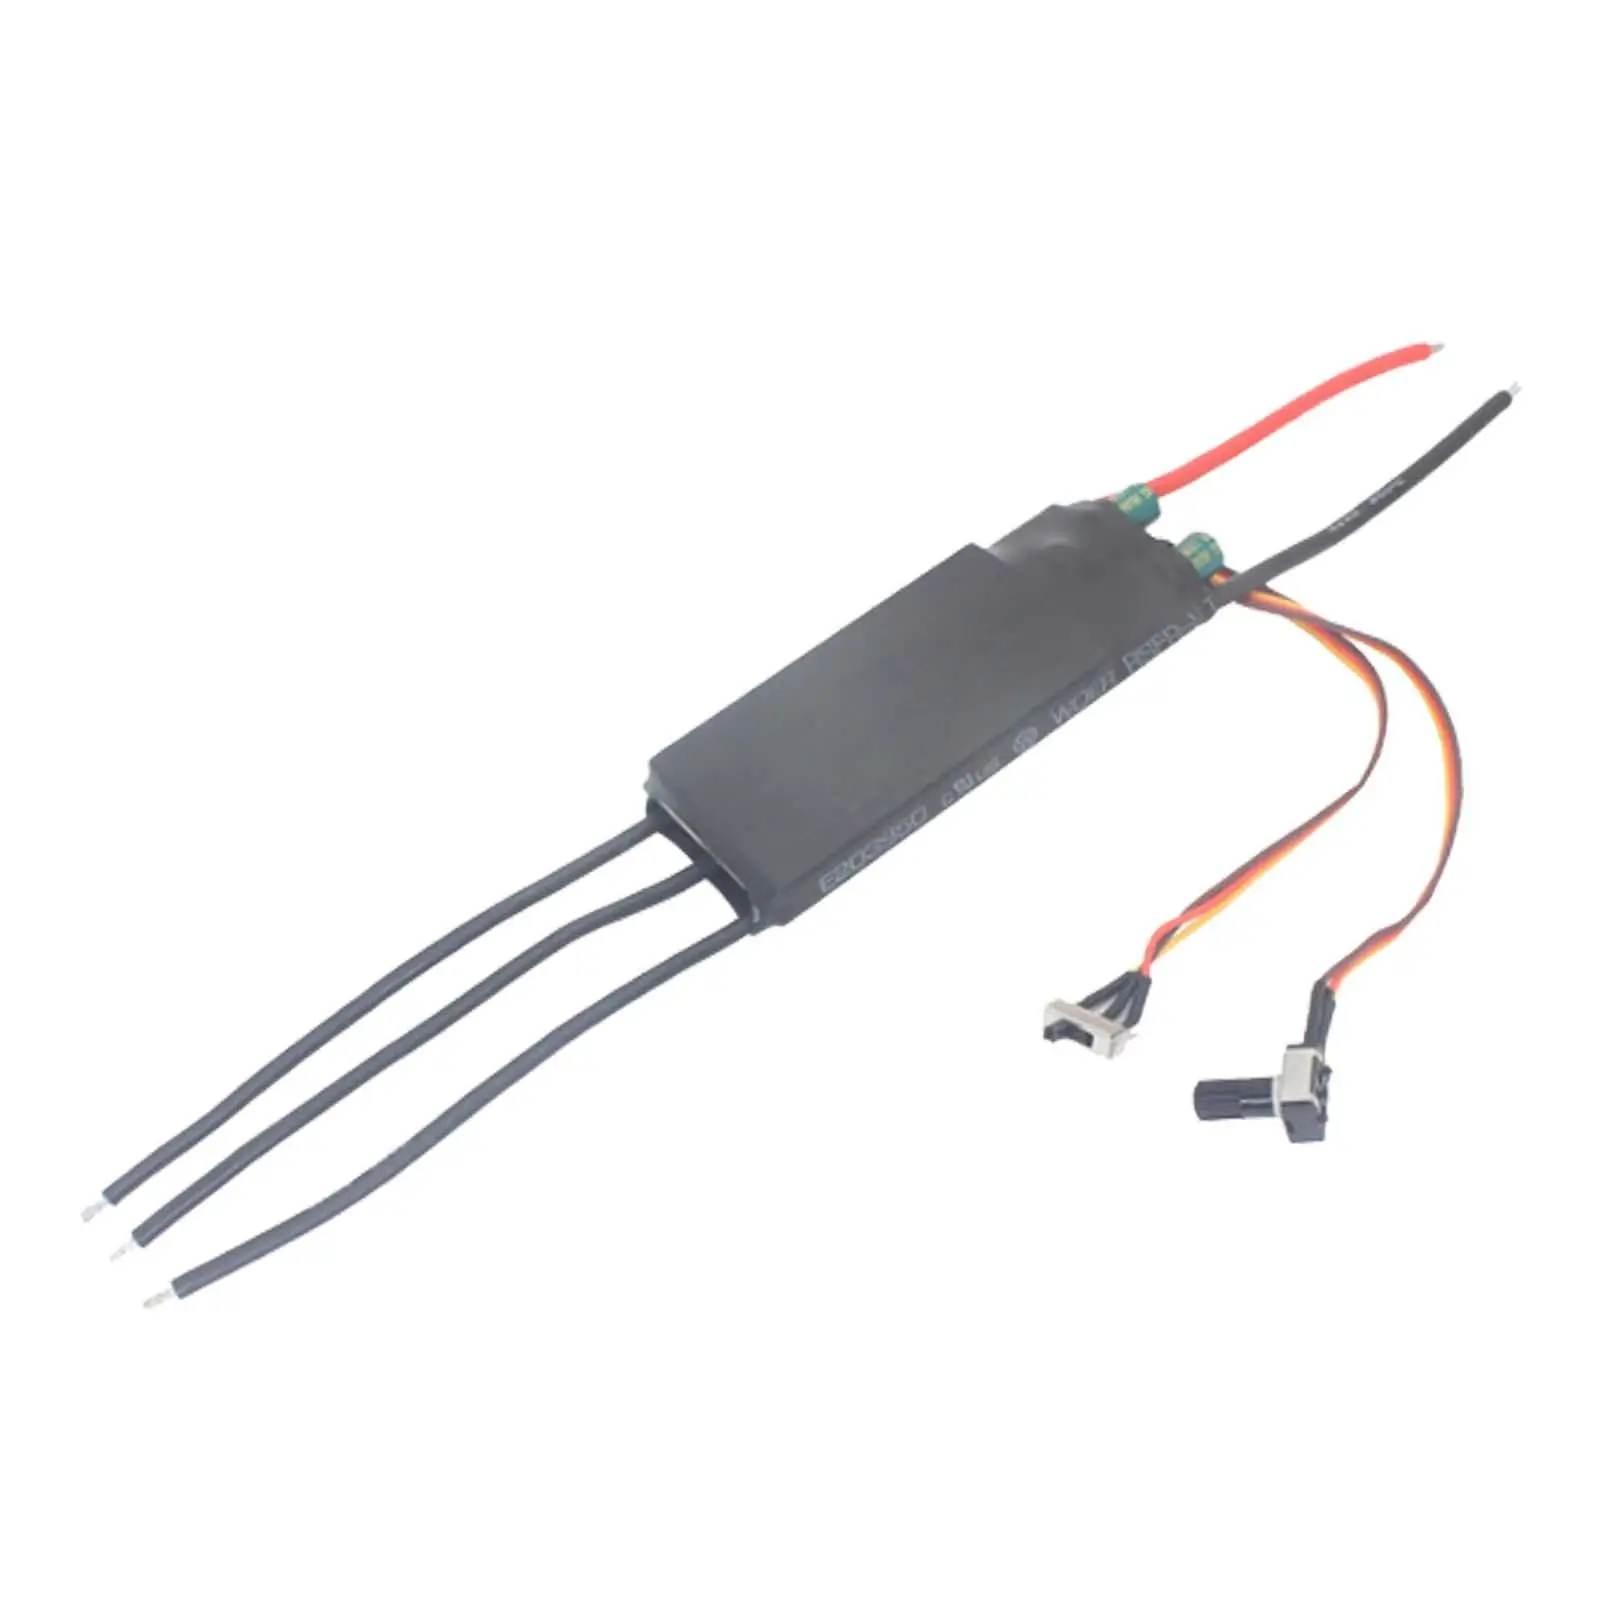 DC Motor Speed Controller with Potentiometer with Overload Protector Compact Size Brushless Hallless Motor for Fan Accessories